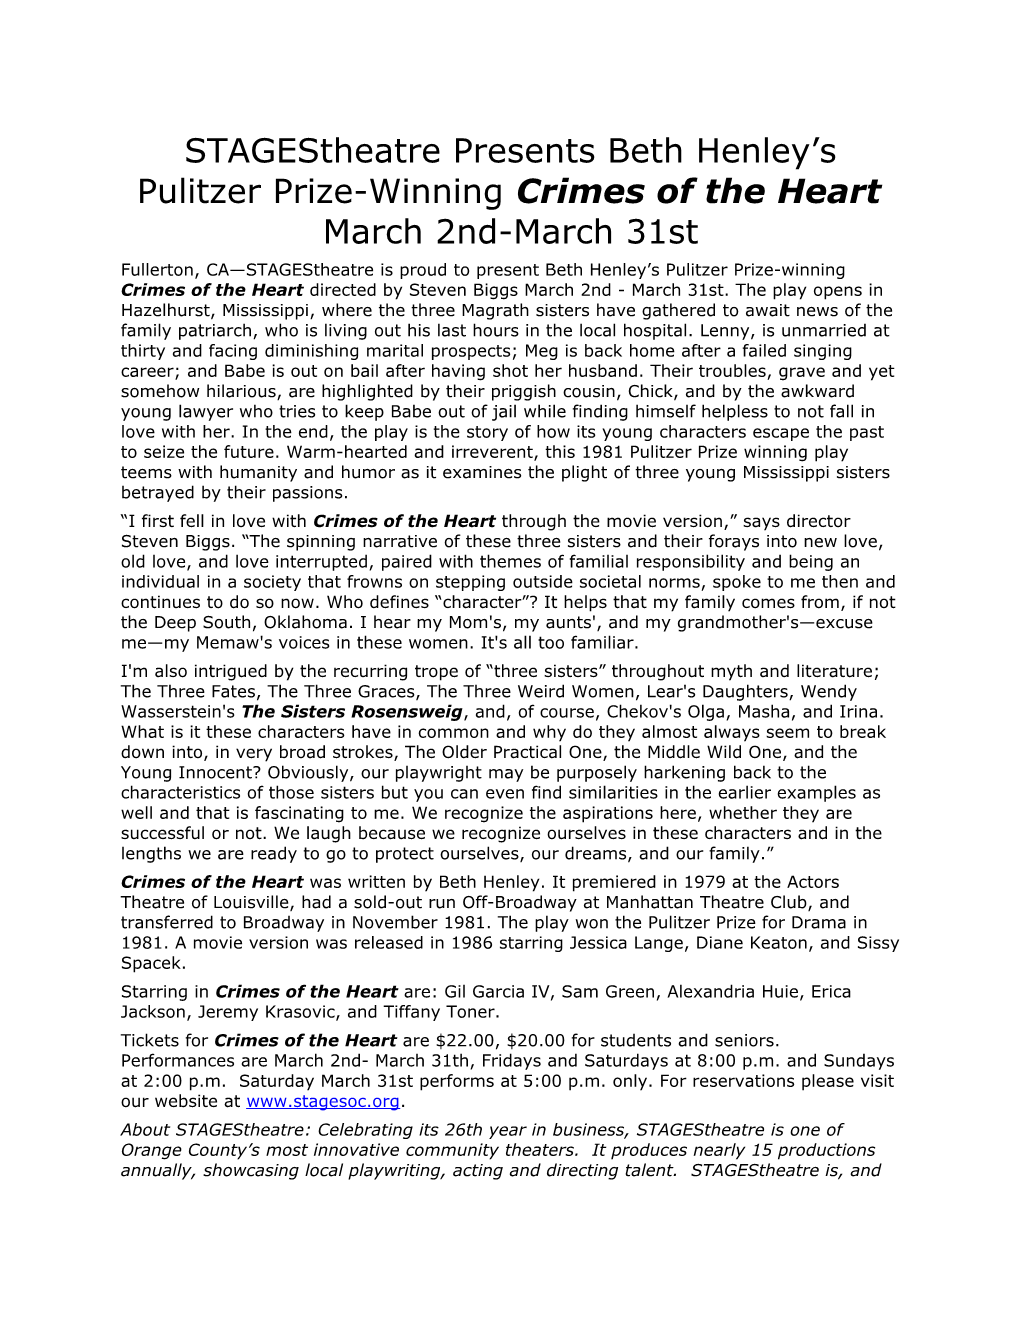 Stagestheatre Presents Beth Henley S Pulitzer Prize-Winning Crimes of the Heart March